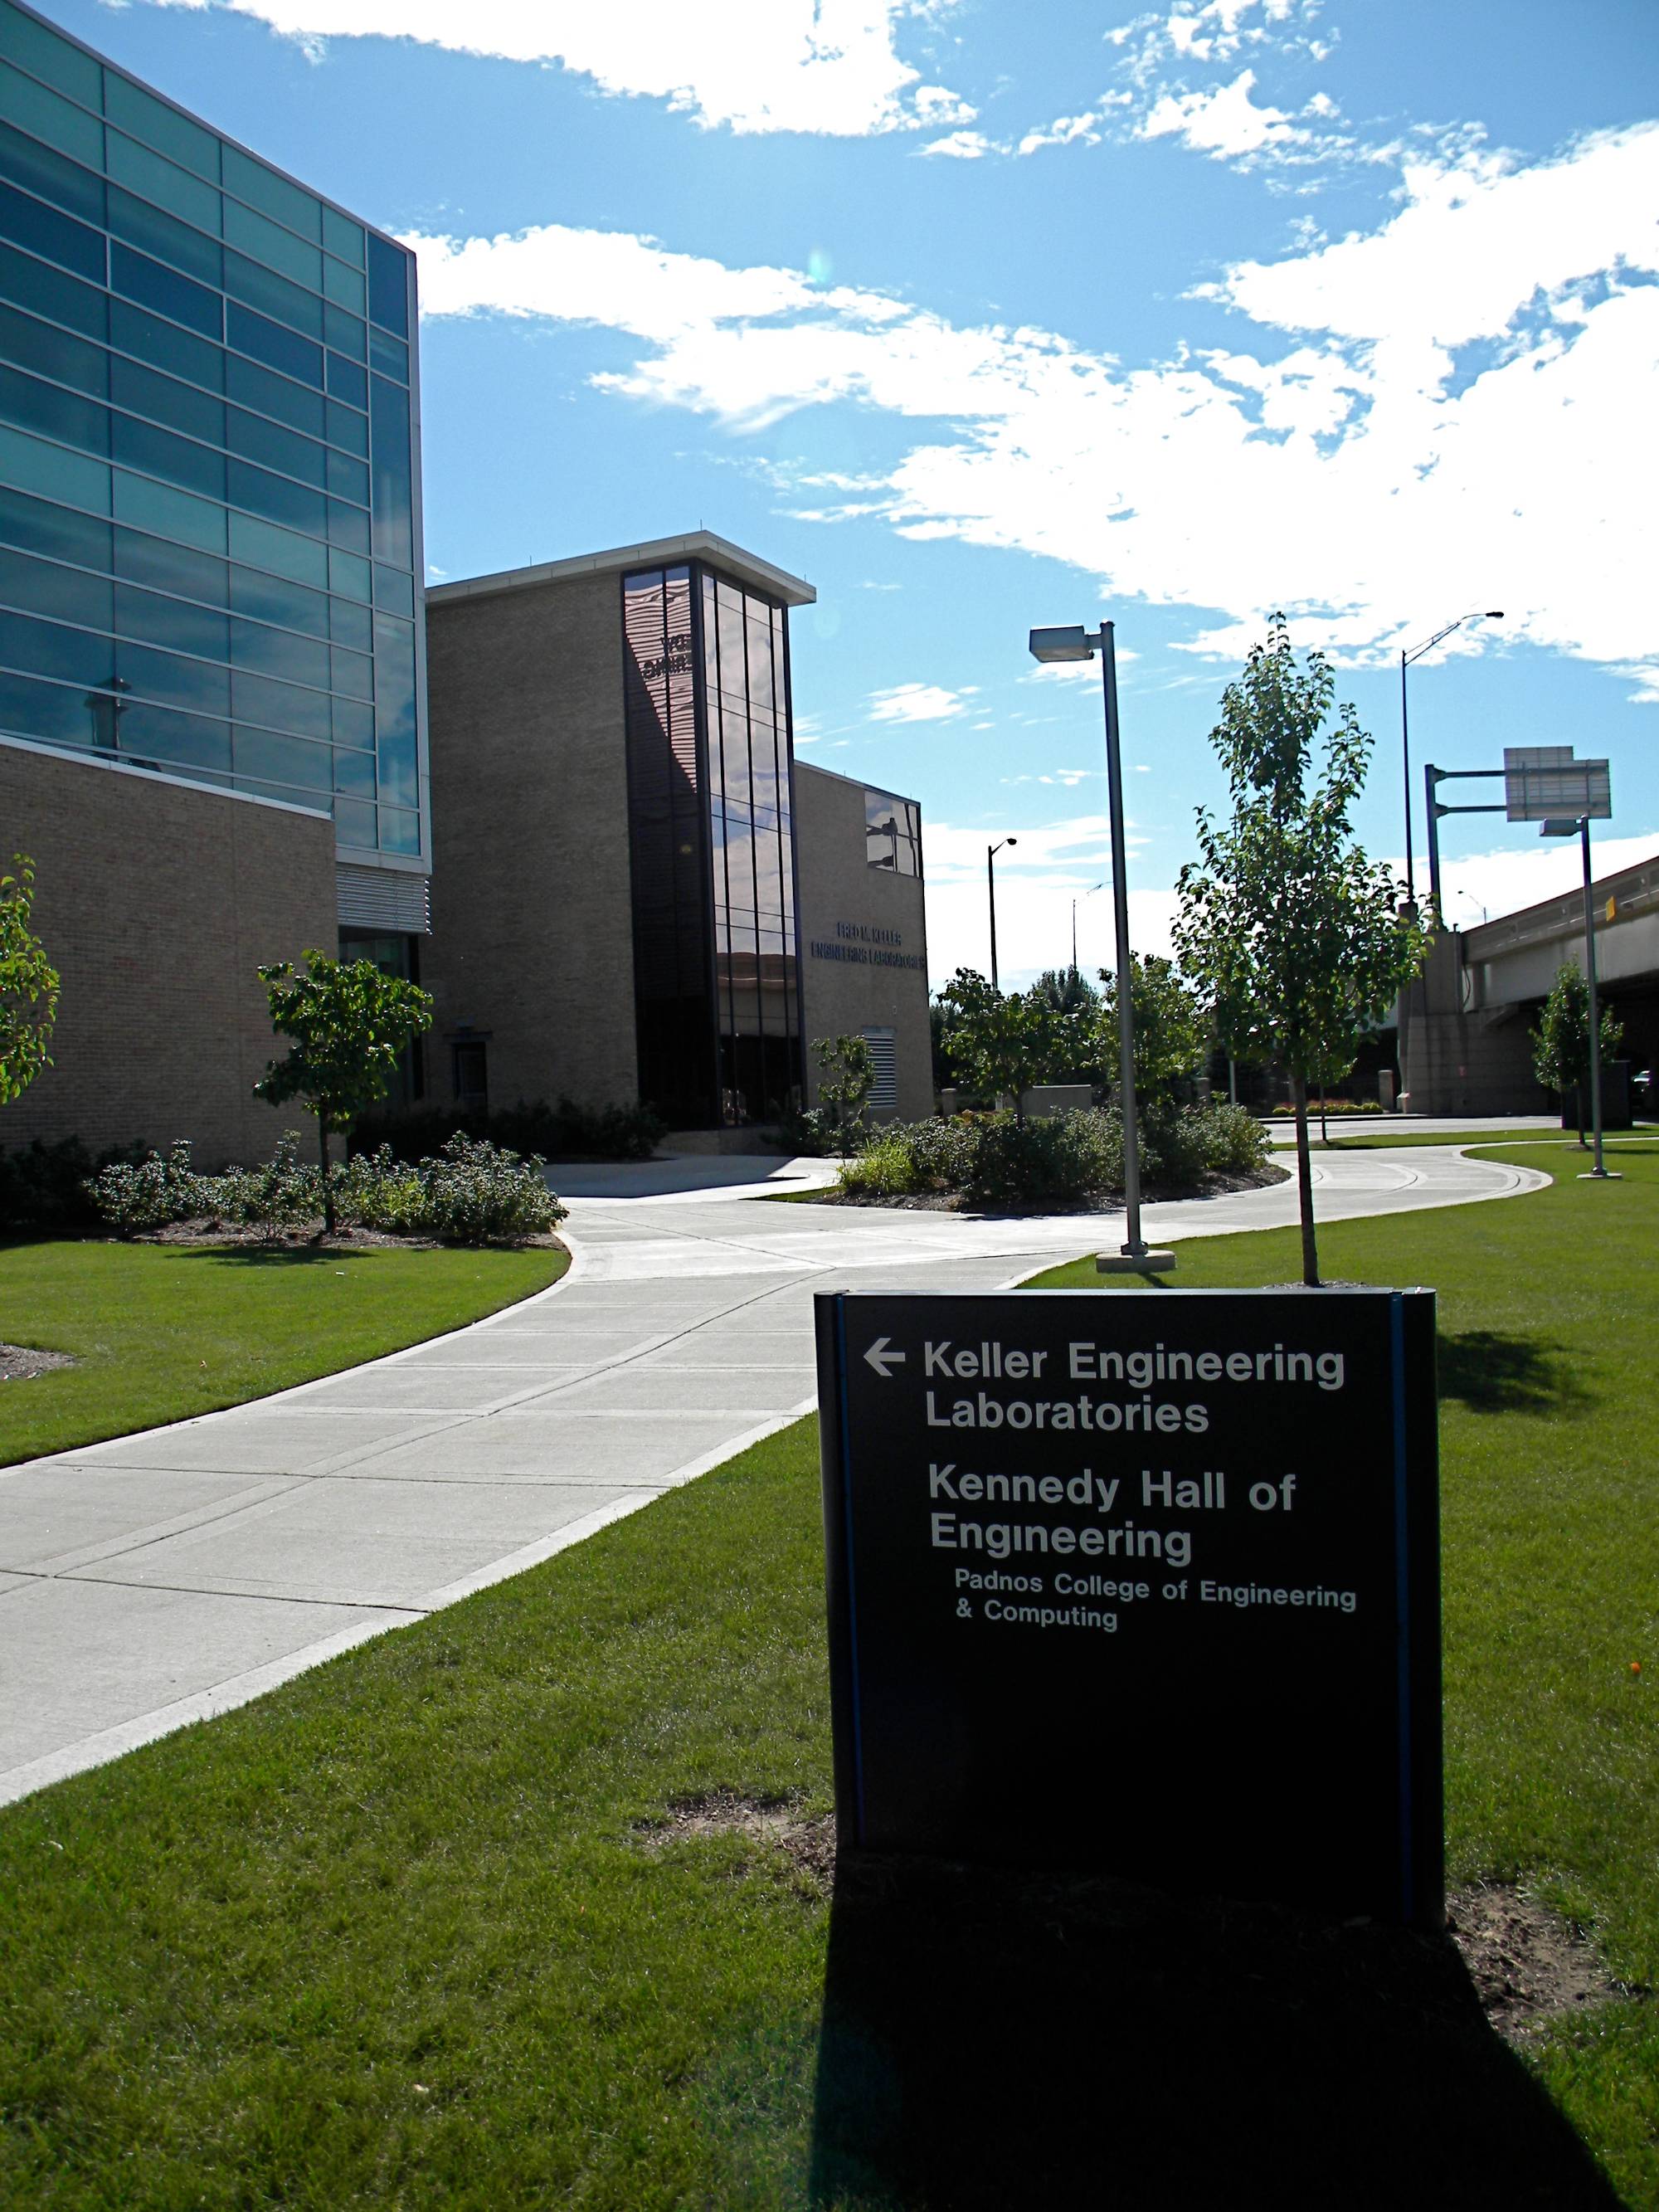 Kennedy Hall of Engineering where the College of Engineering is located